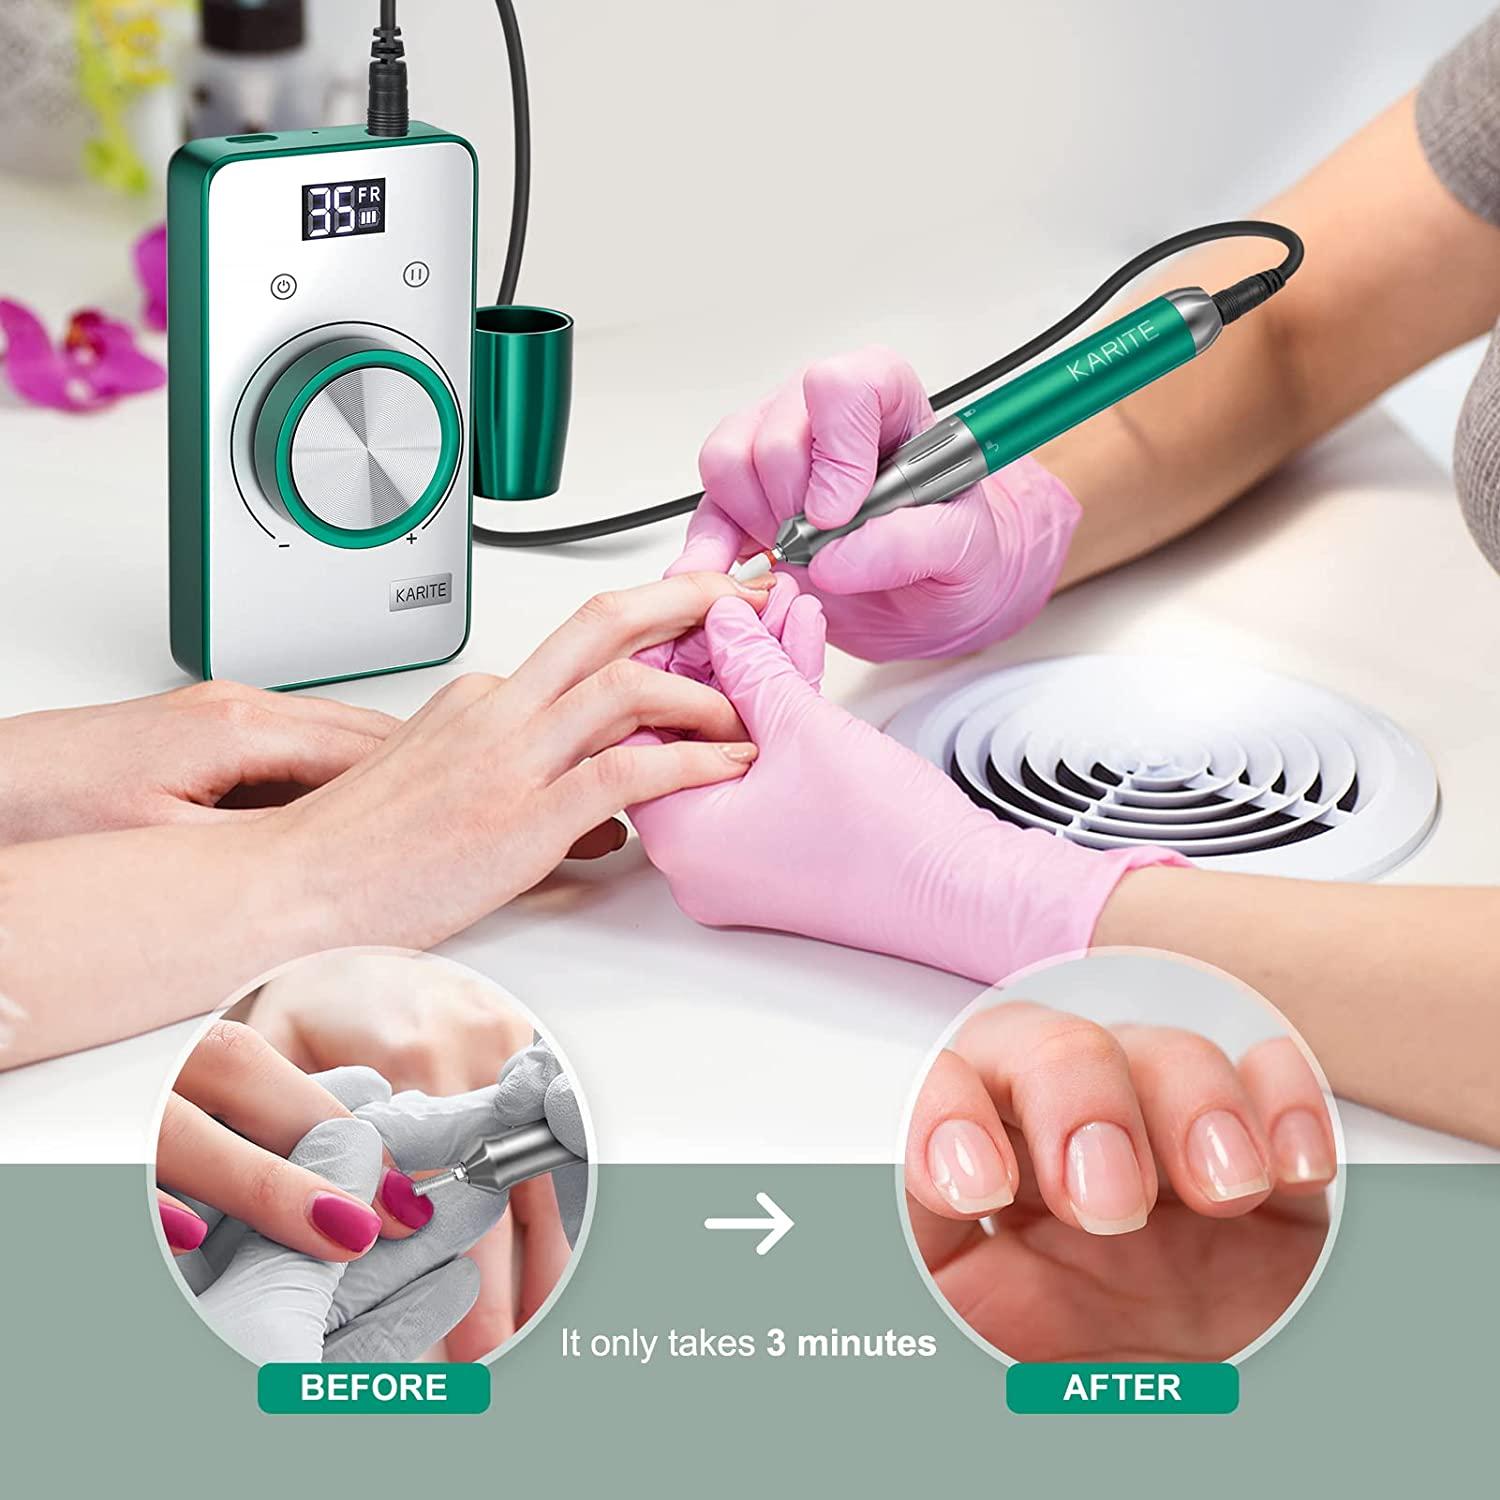 KARITE Rechargeable Nail Drill with 30H Working Time and 35000RMP Professional Acrylic Nail Drill Machine, Portable Electric Nail File with 13 Bits Coreless Motor for Nail Art Manicure Pedicure Dark Green pic